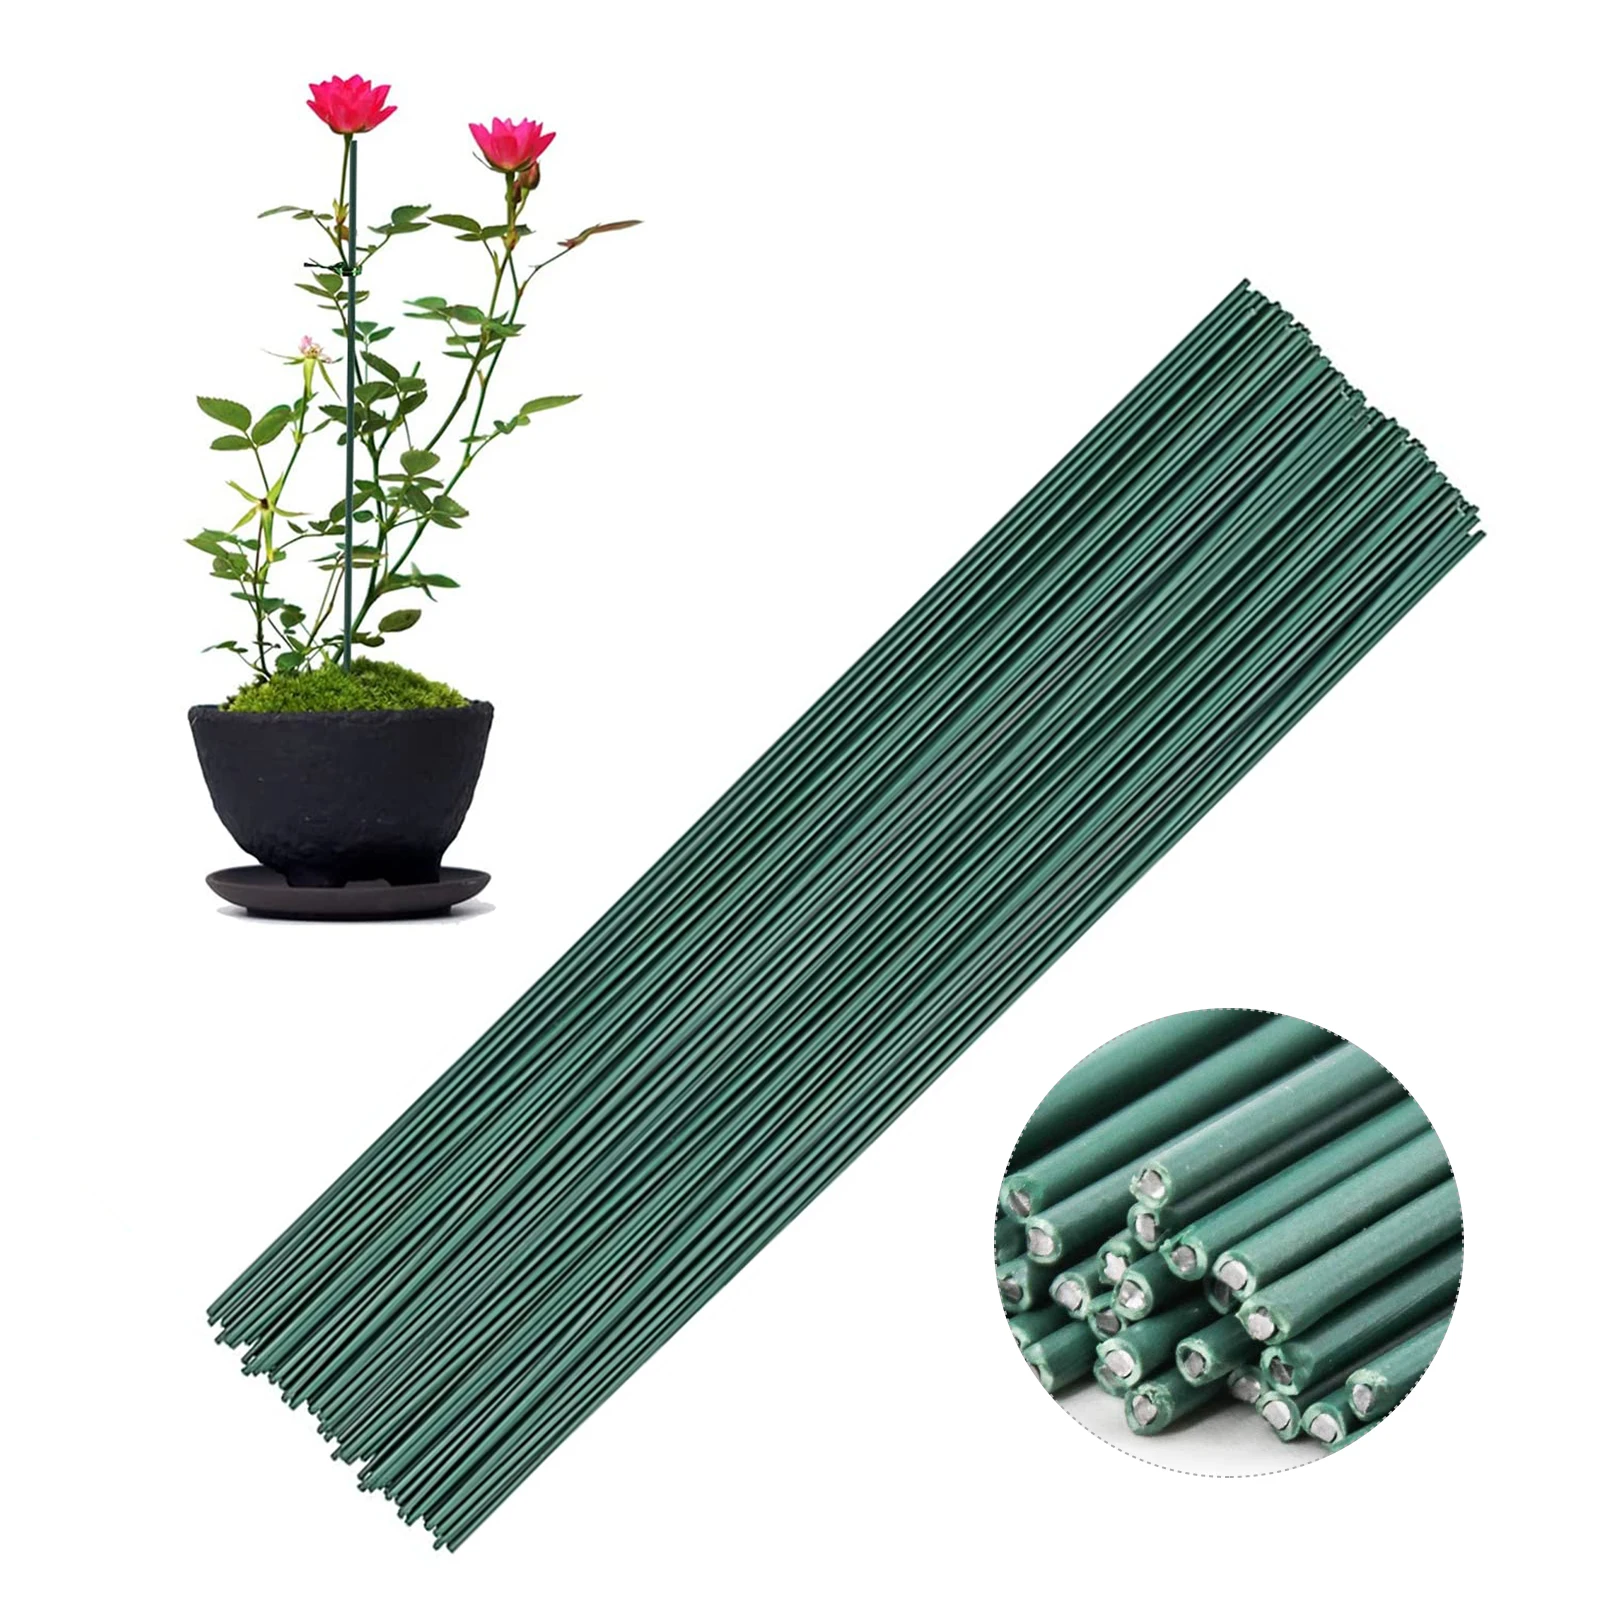 Flowes Arrangement Plant Stakes Sticks Canes Green Plant Support Bamboo Stick